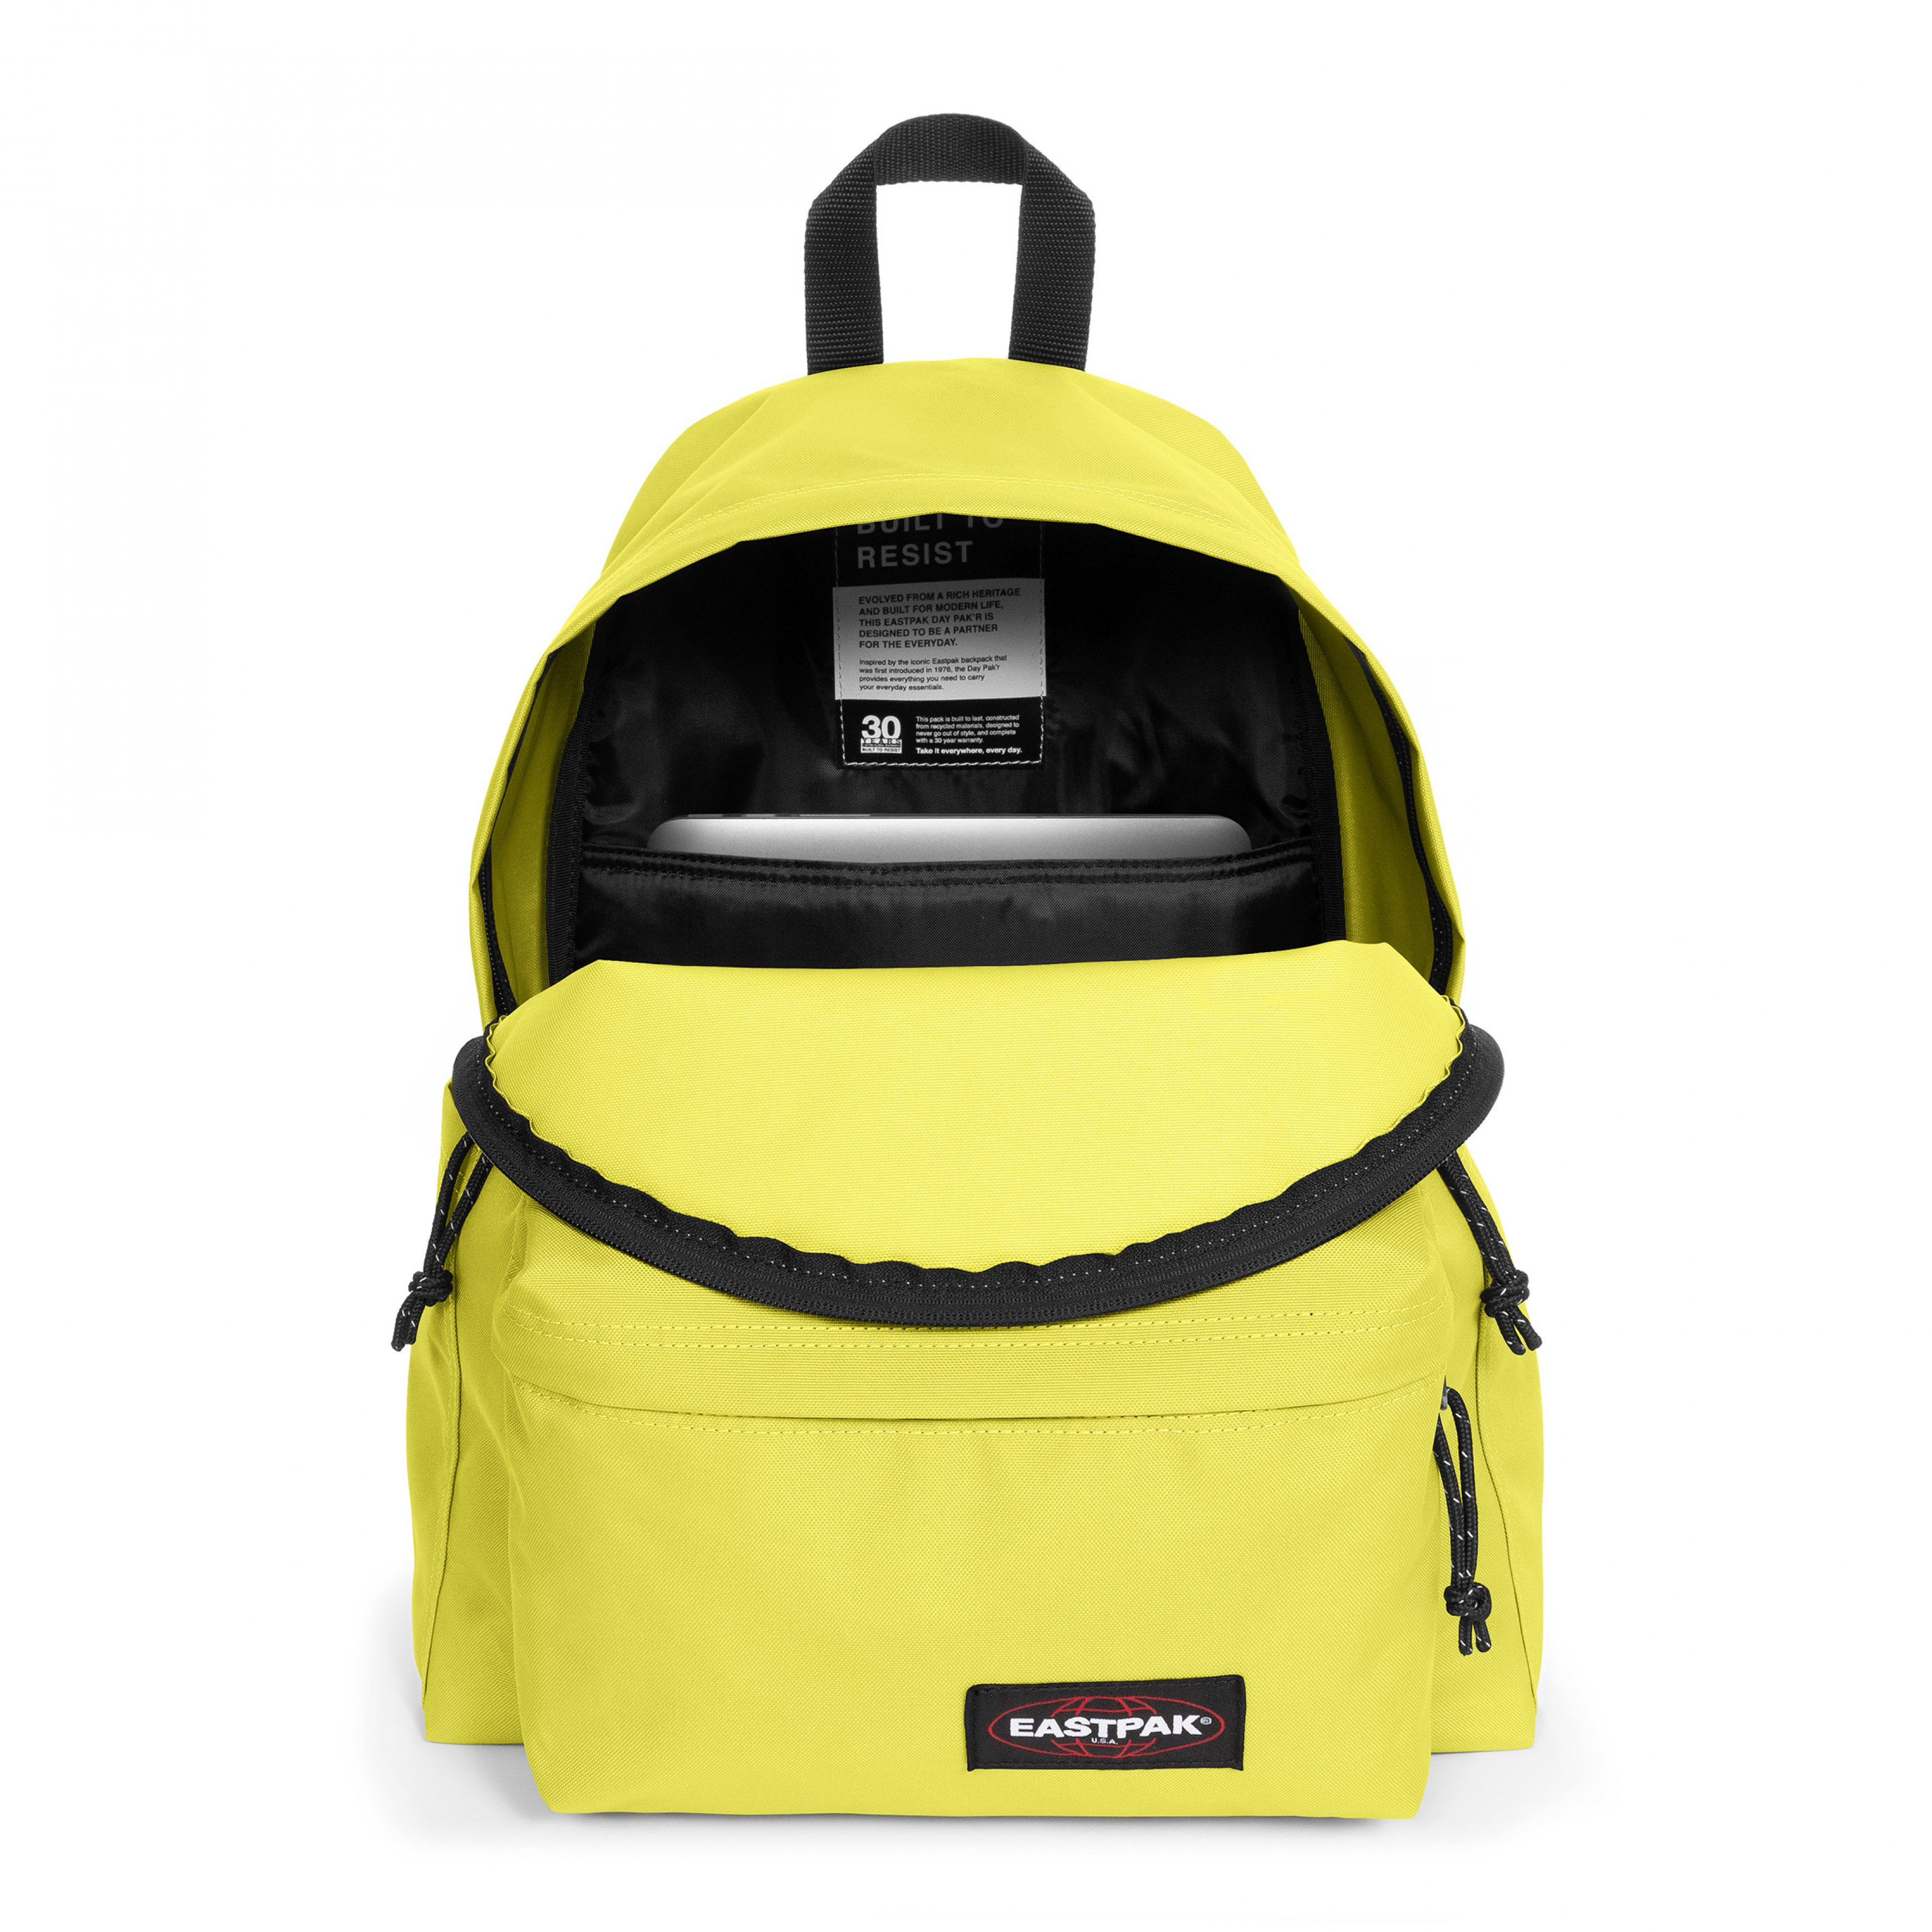 Eastpak - Zaino Day Pak'r Neon Lime, Giallo, large image number 1